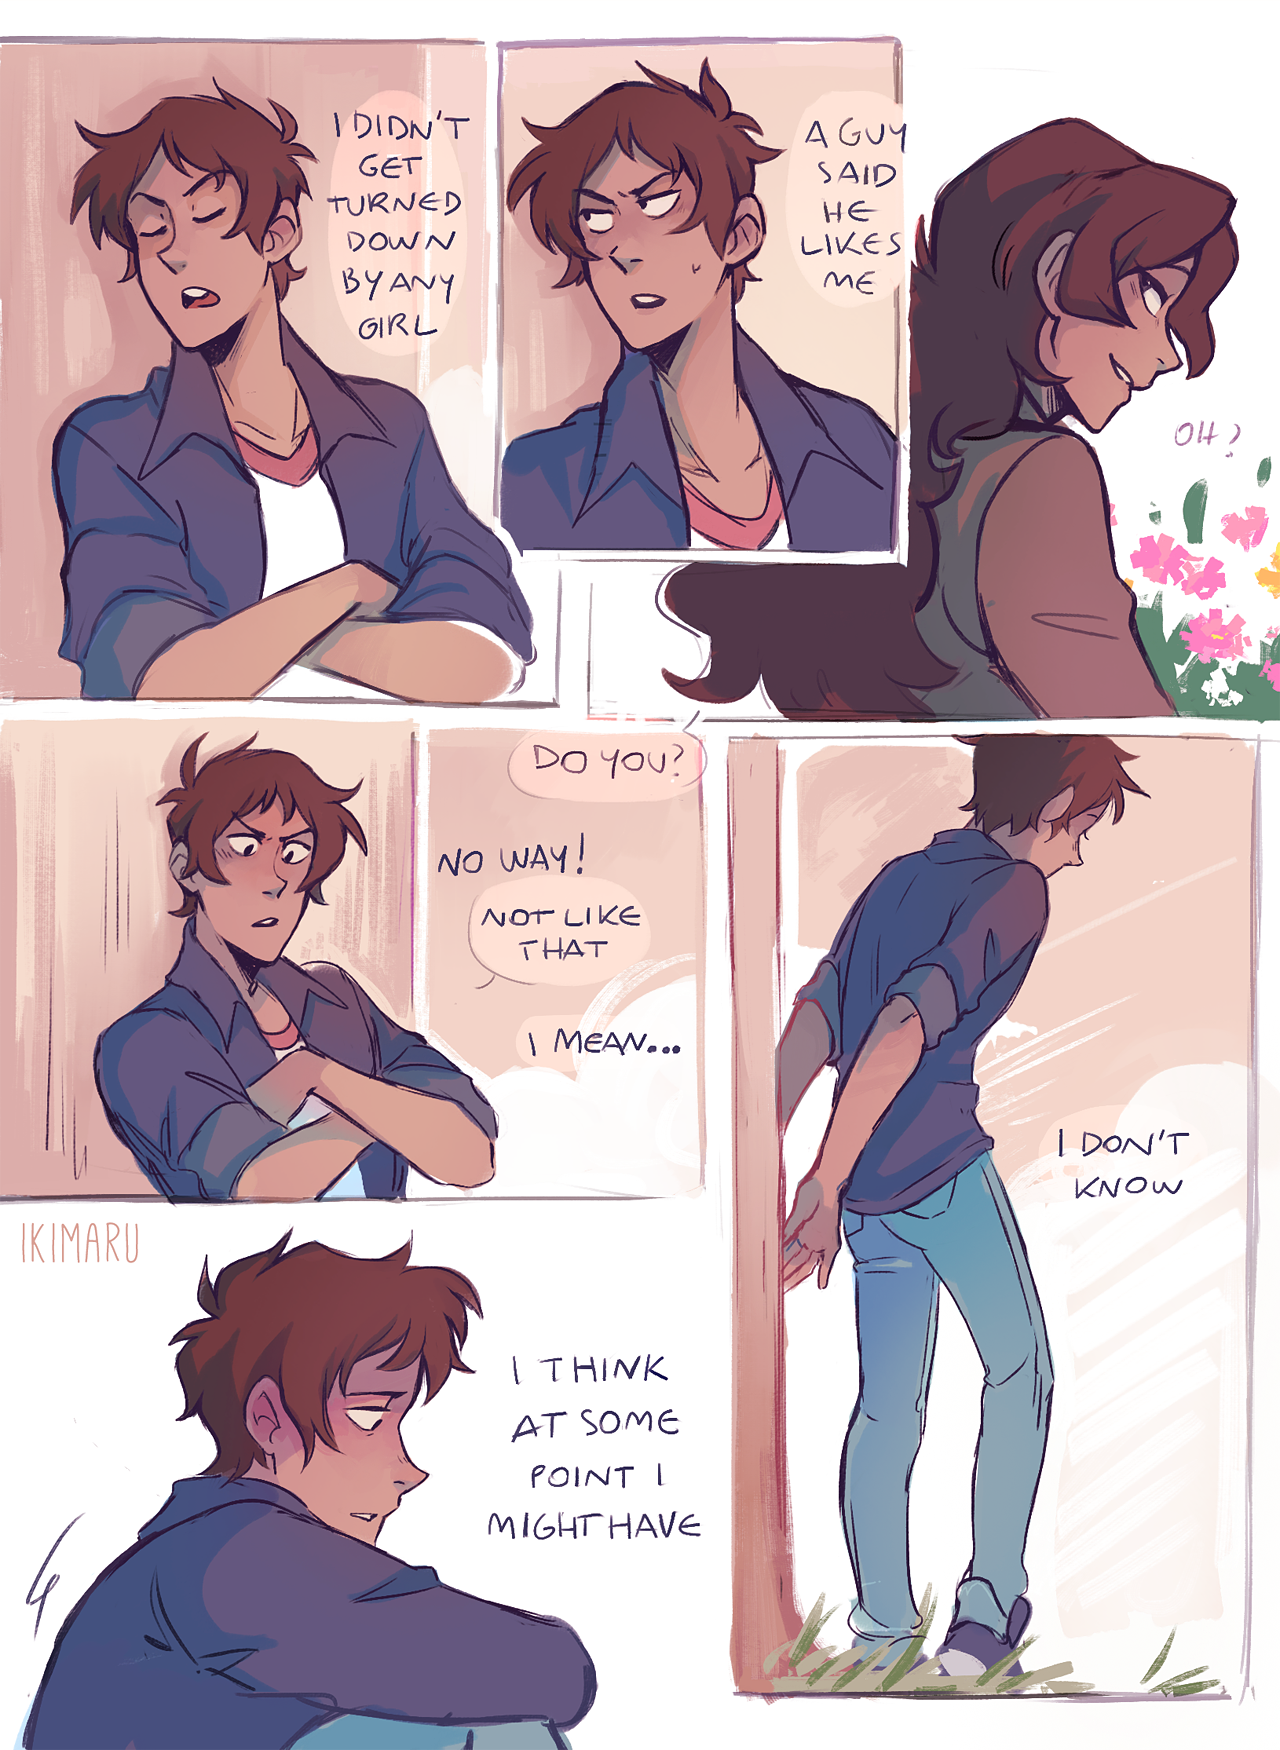 ikimaru: part 5 in which Lance is still thinking about it and Rachel has no time